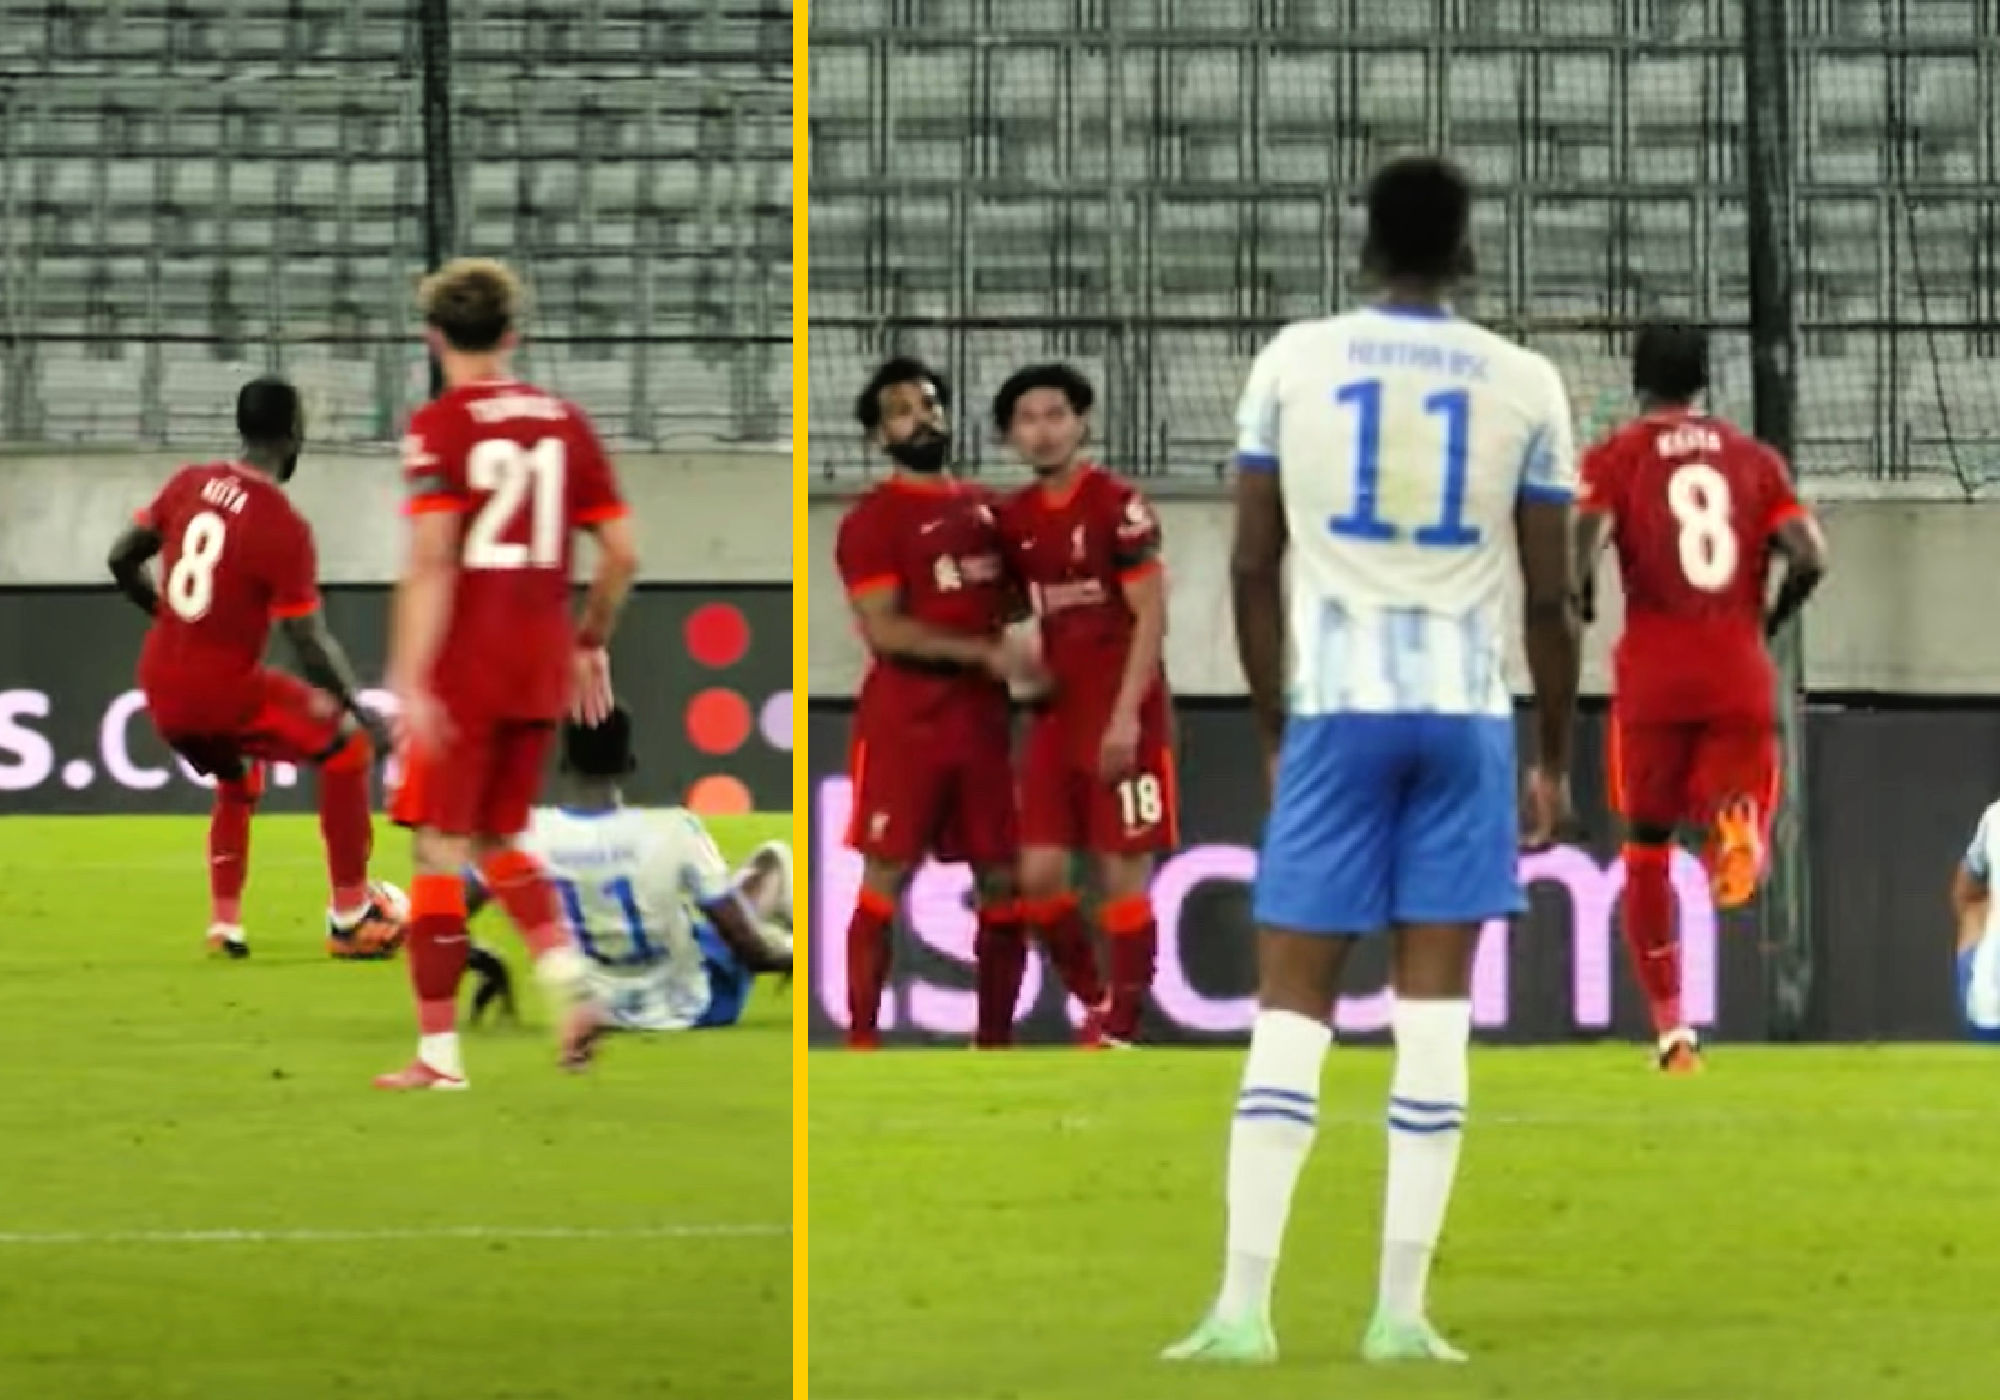 Liverpool's second goal against Hertha Berlin was a result of the brilliant combination play between Naby Keita, Mohamed Salah and Takumi Minamino